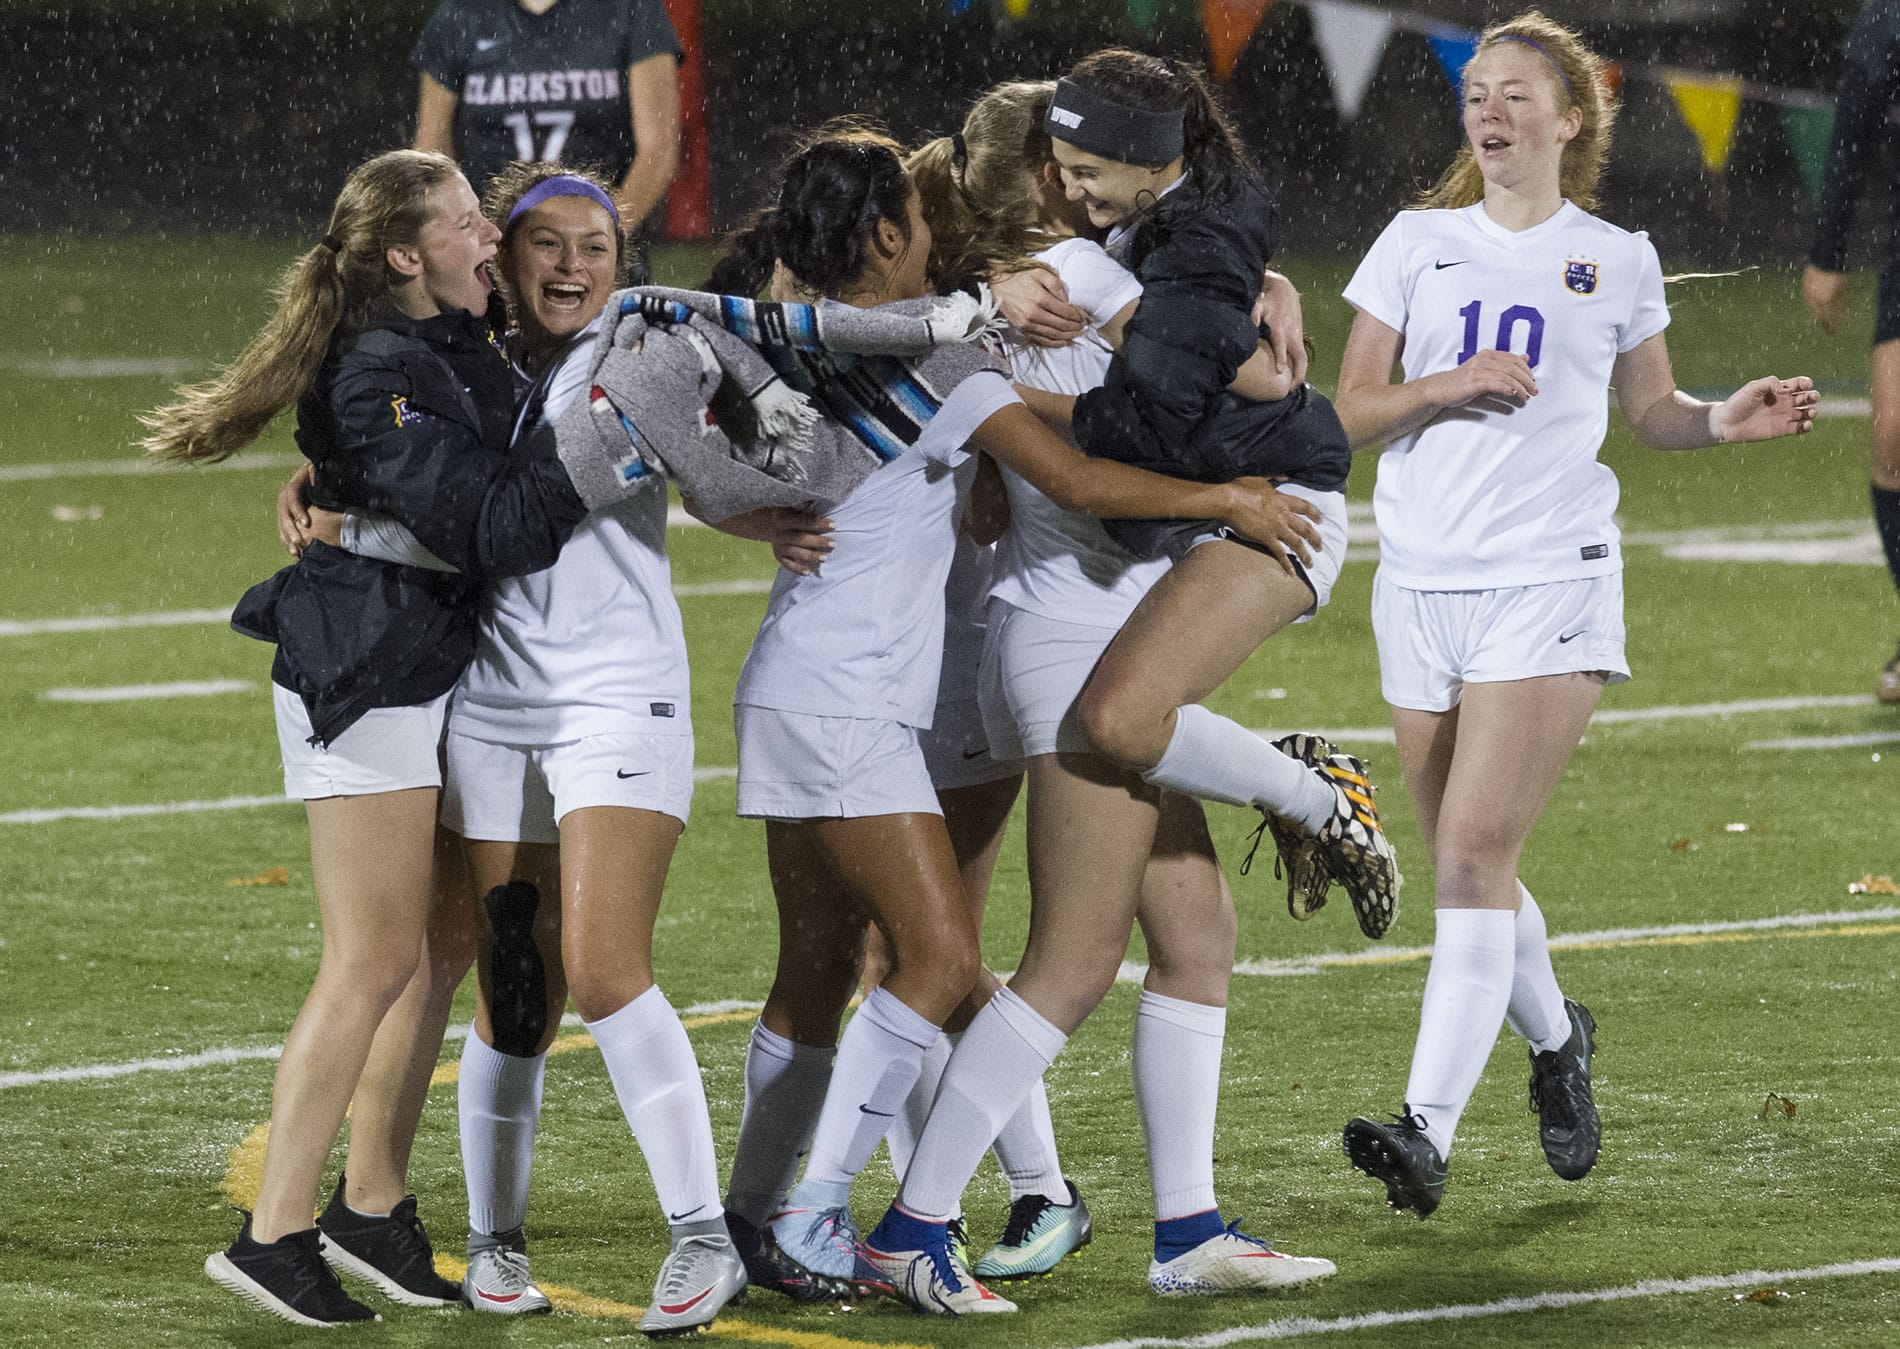 Columbia River girl’s soccer players celebrate after winning the first round of the class 2A girls soccer state playoffs, beating Clarkston 2-1, at Kiggins Bowl in Vancouver, Wednesday November 8, 2017.